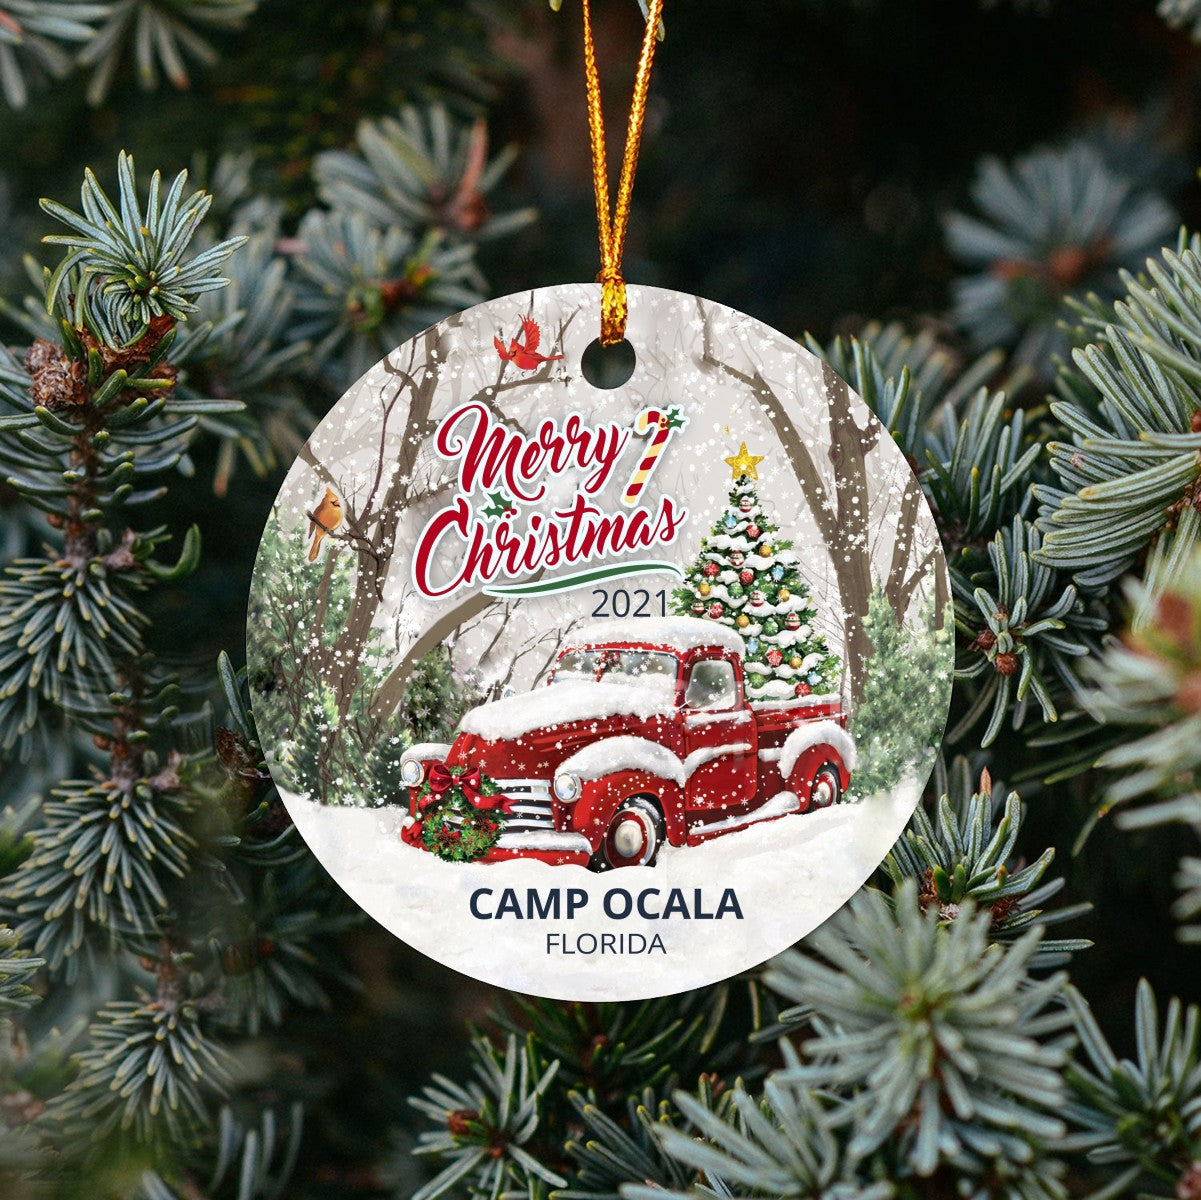 Christmas Tree Ornaments Camp Ocala - Ornament With Name City, State Camp Ocala Florida FL Ornament - Red Truck Xmas Ornaments 3'' Plastic Gift For Family, Friend And Housewarming